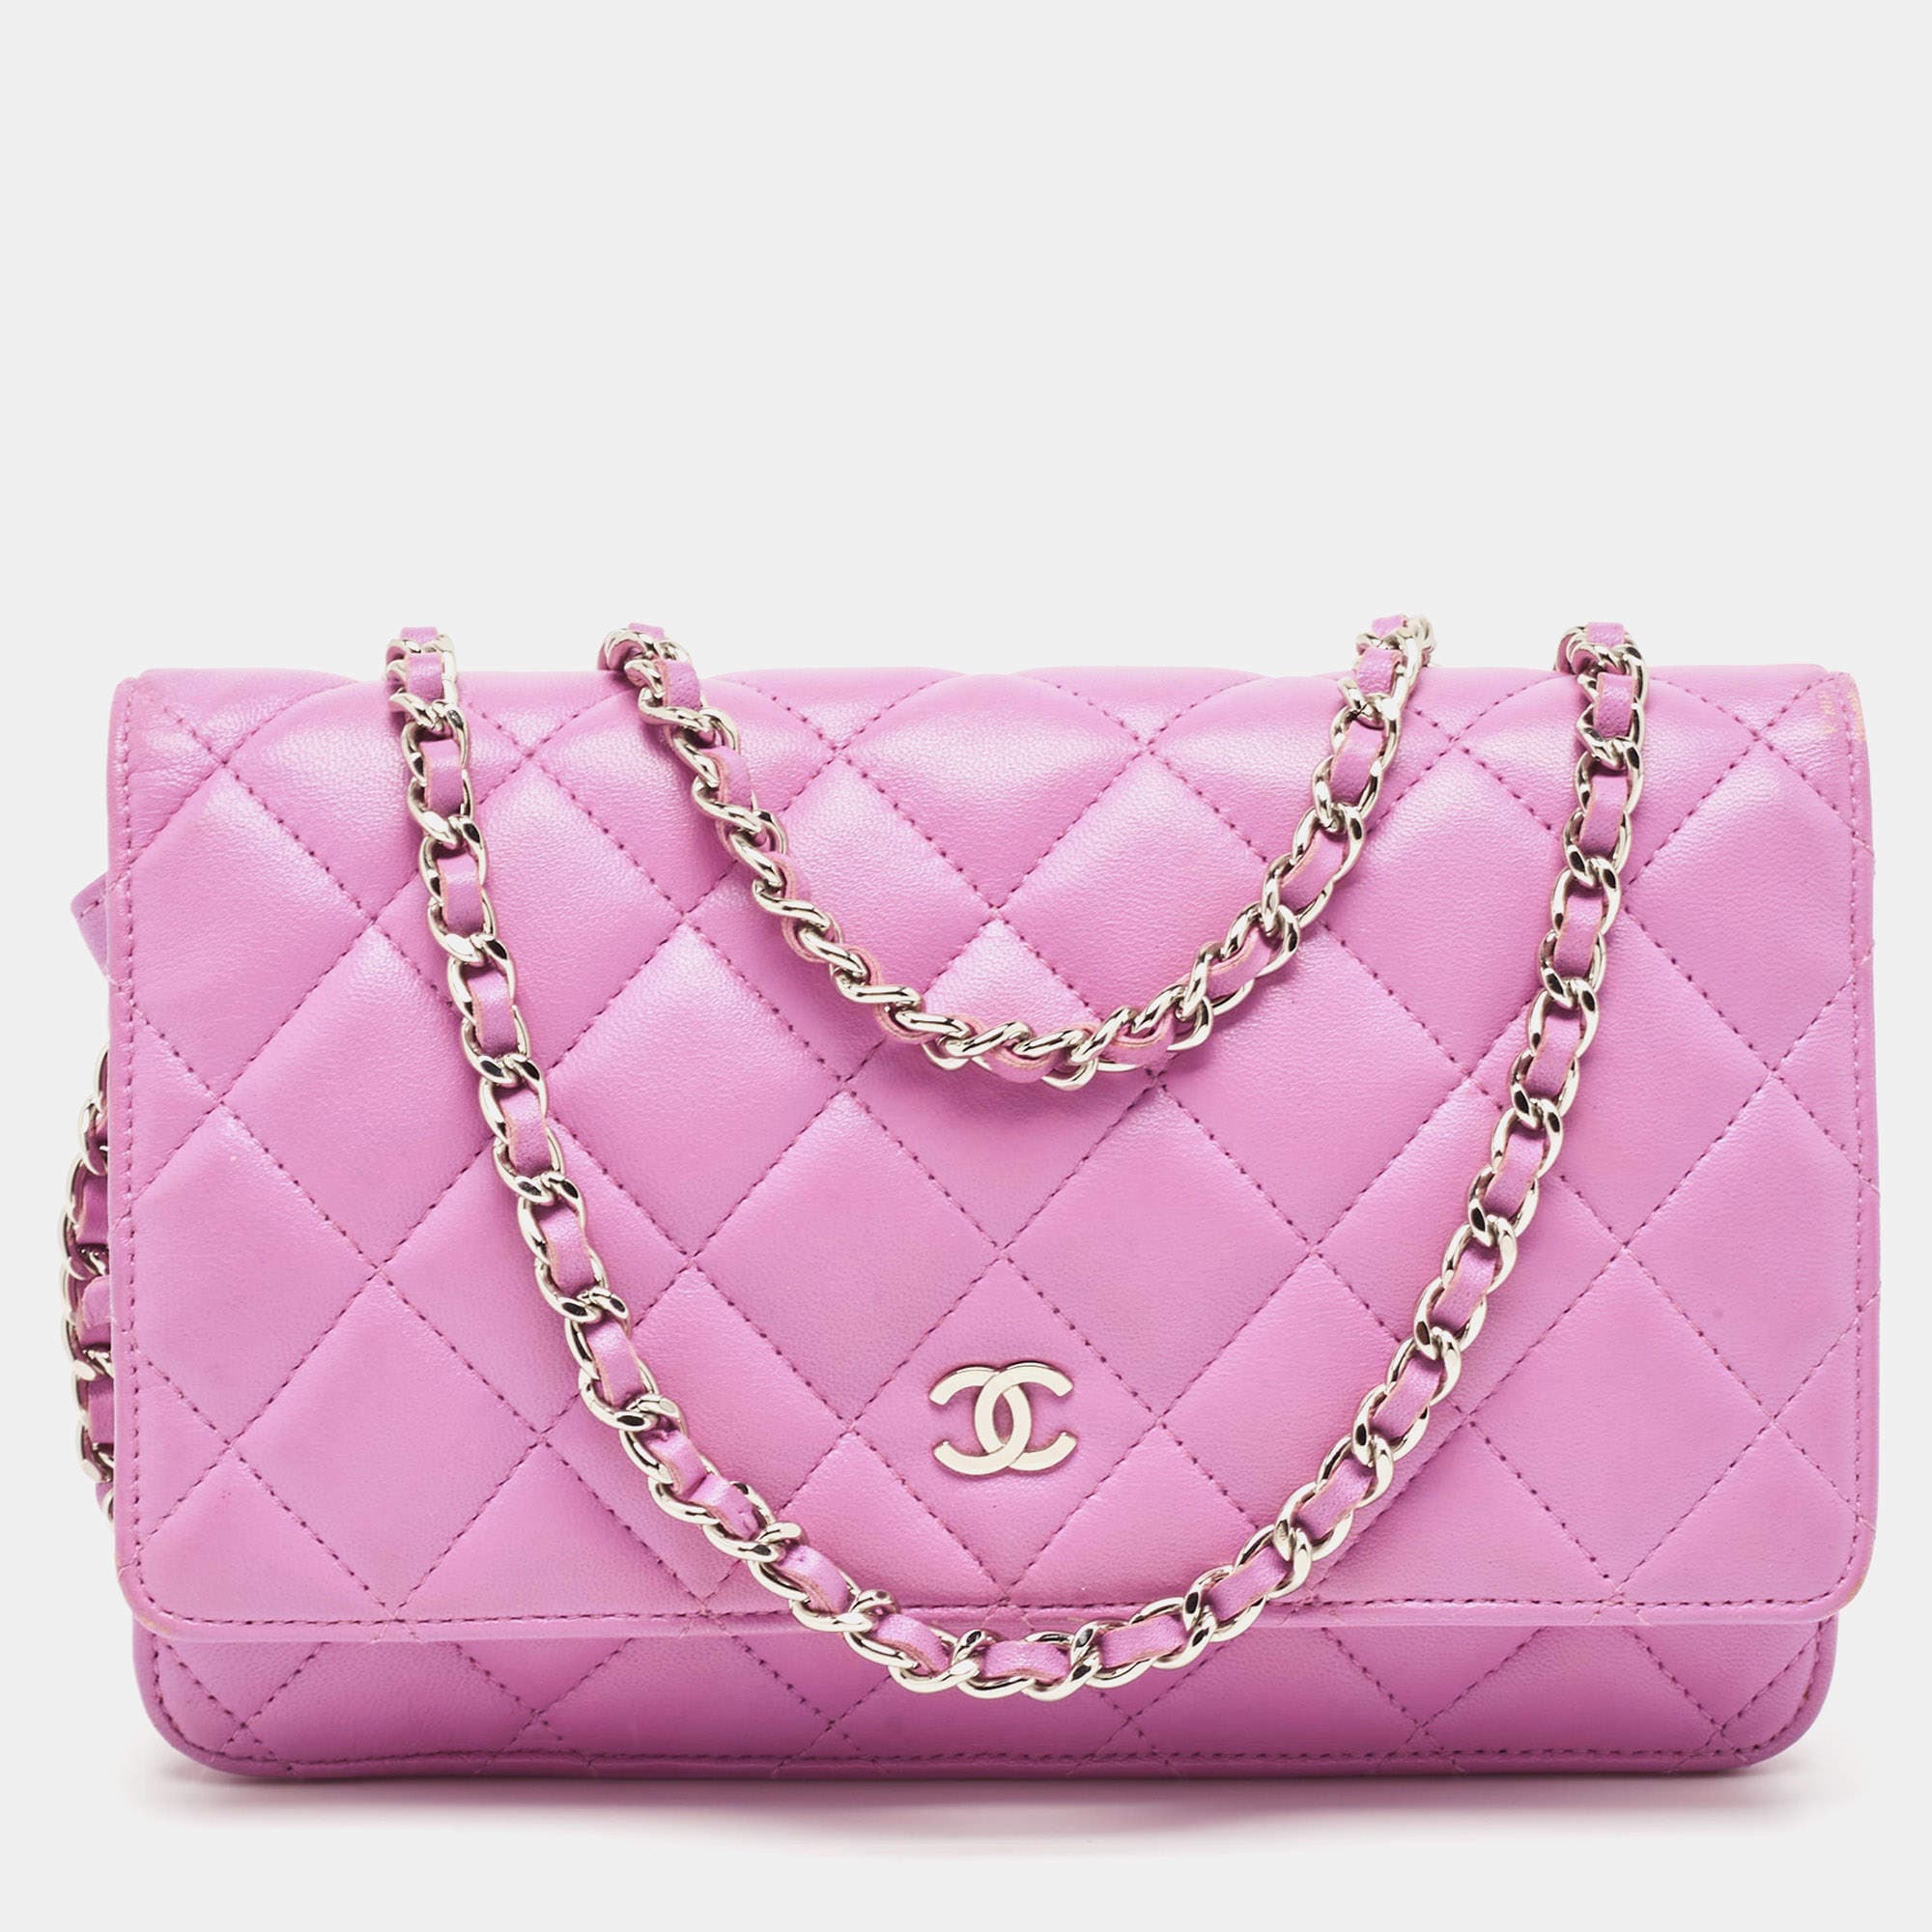 Chanel Chanel Purple Quilted Leather WOC Bag ASCLC2405